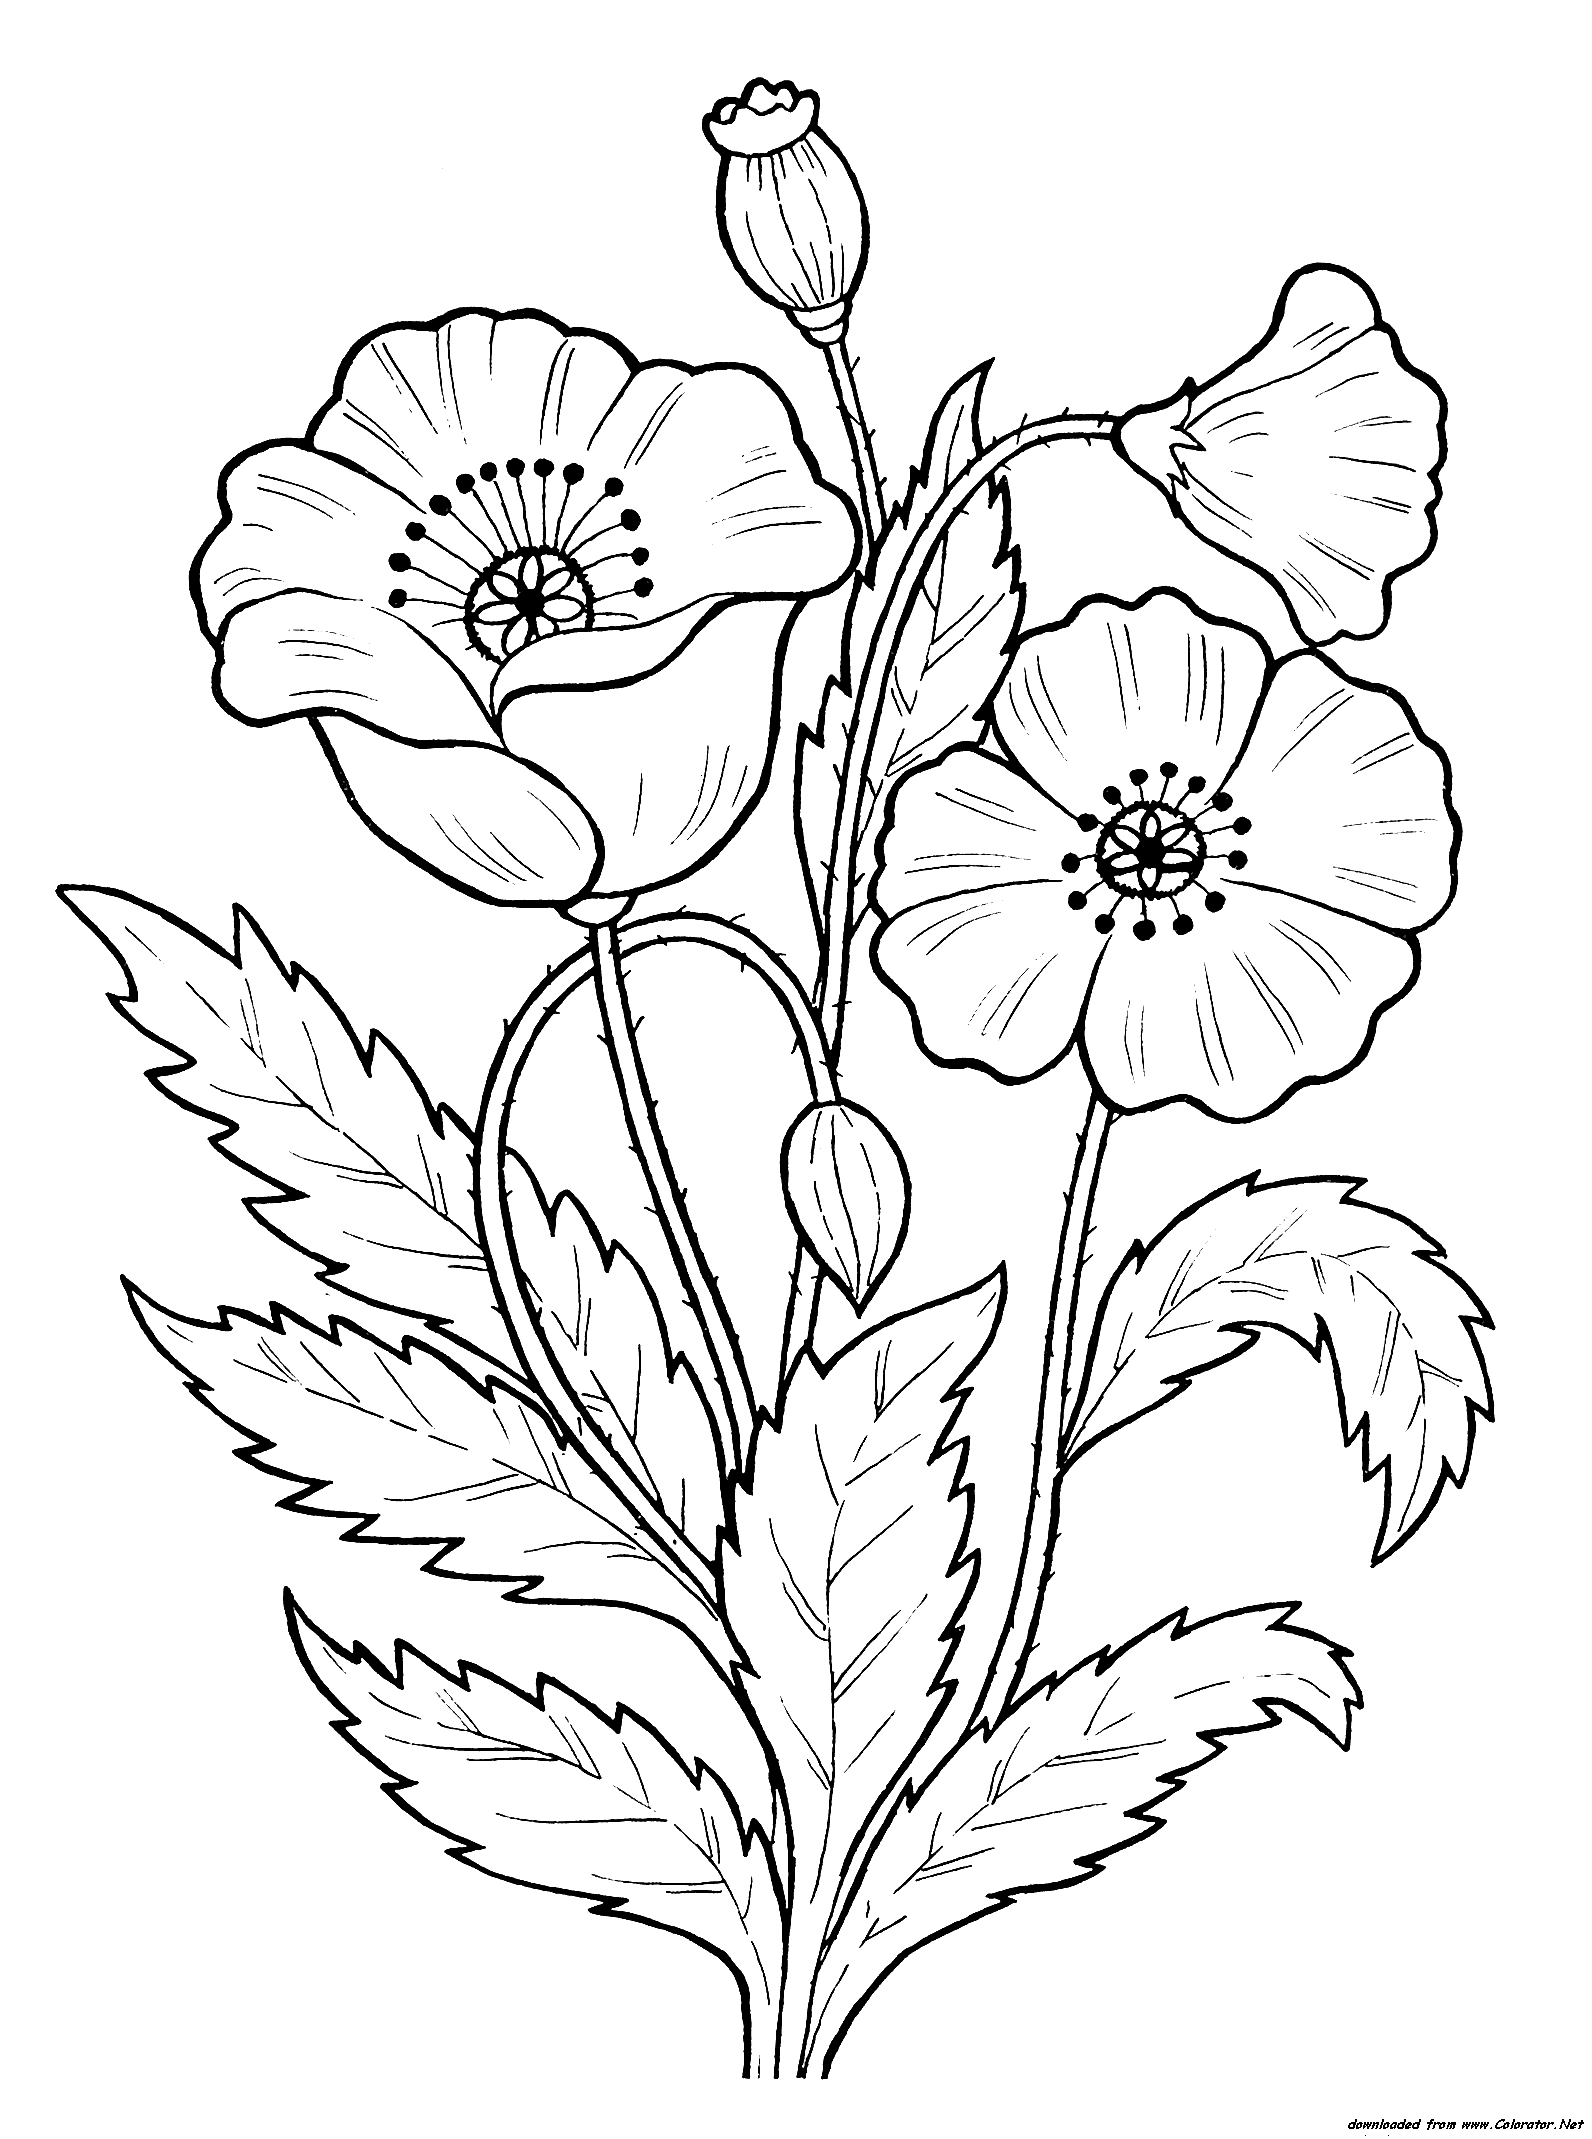 Flowers Picture For Coloring 10